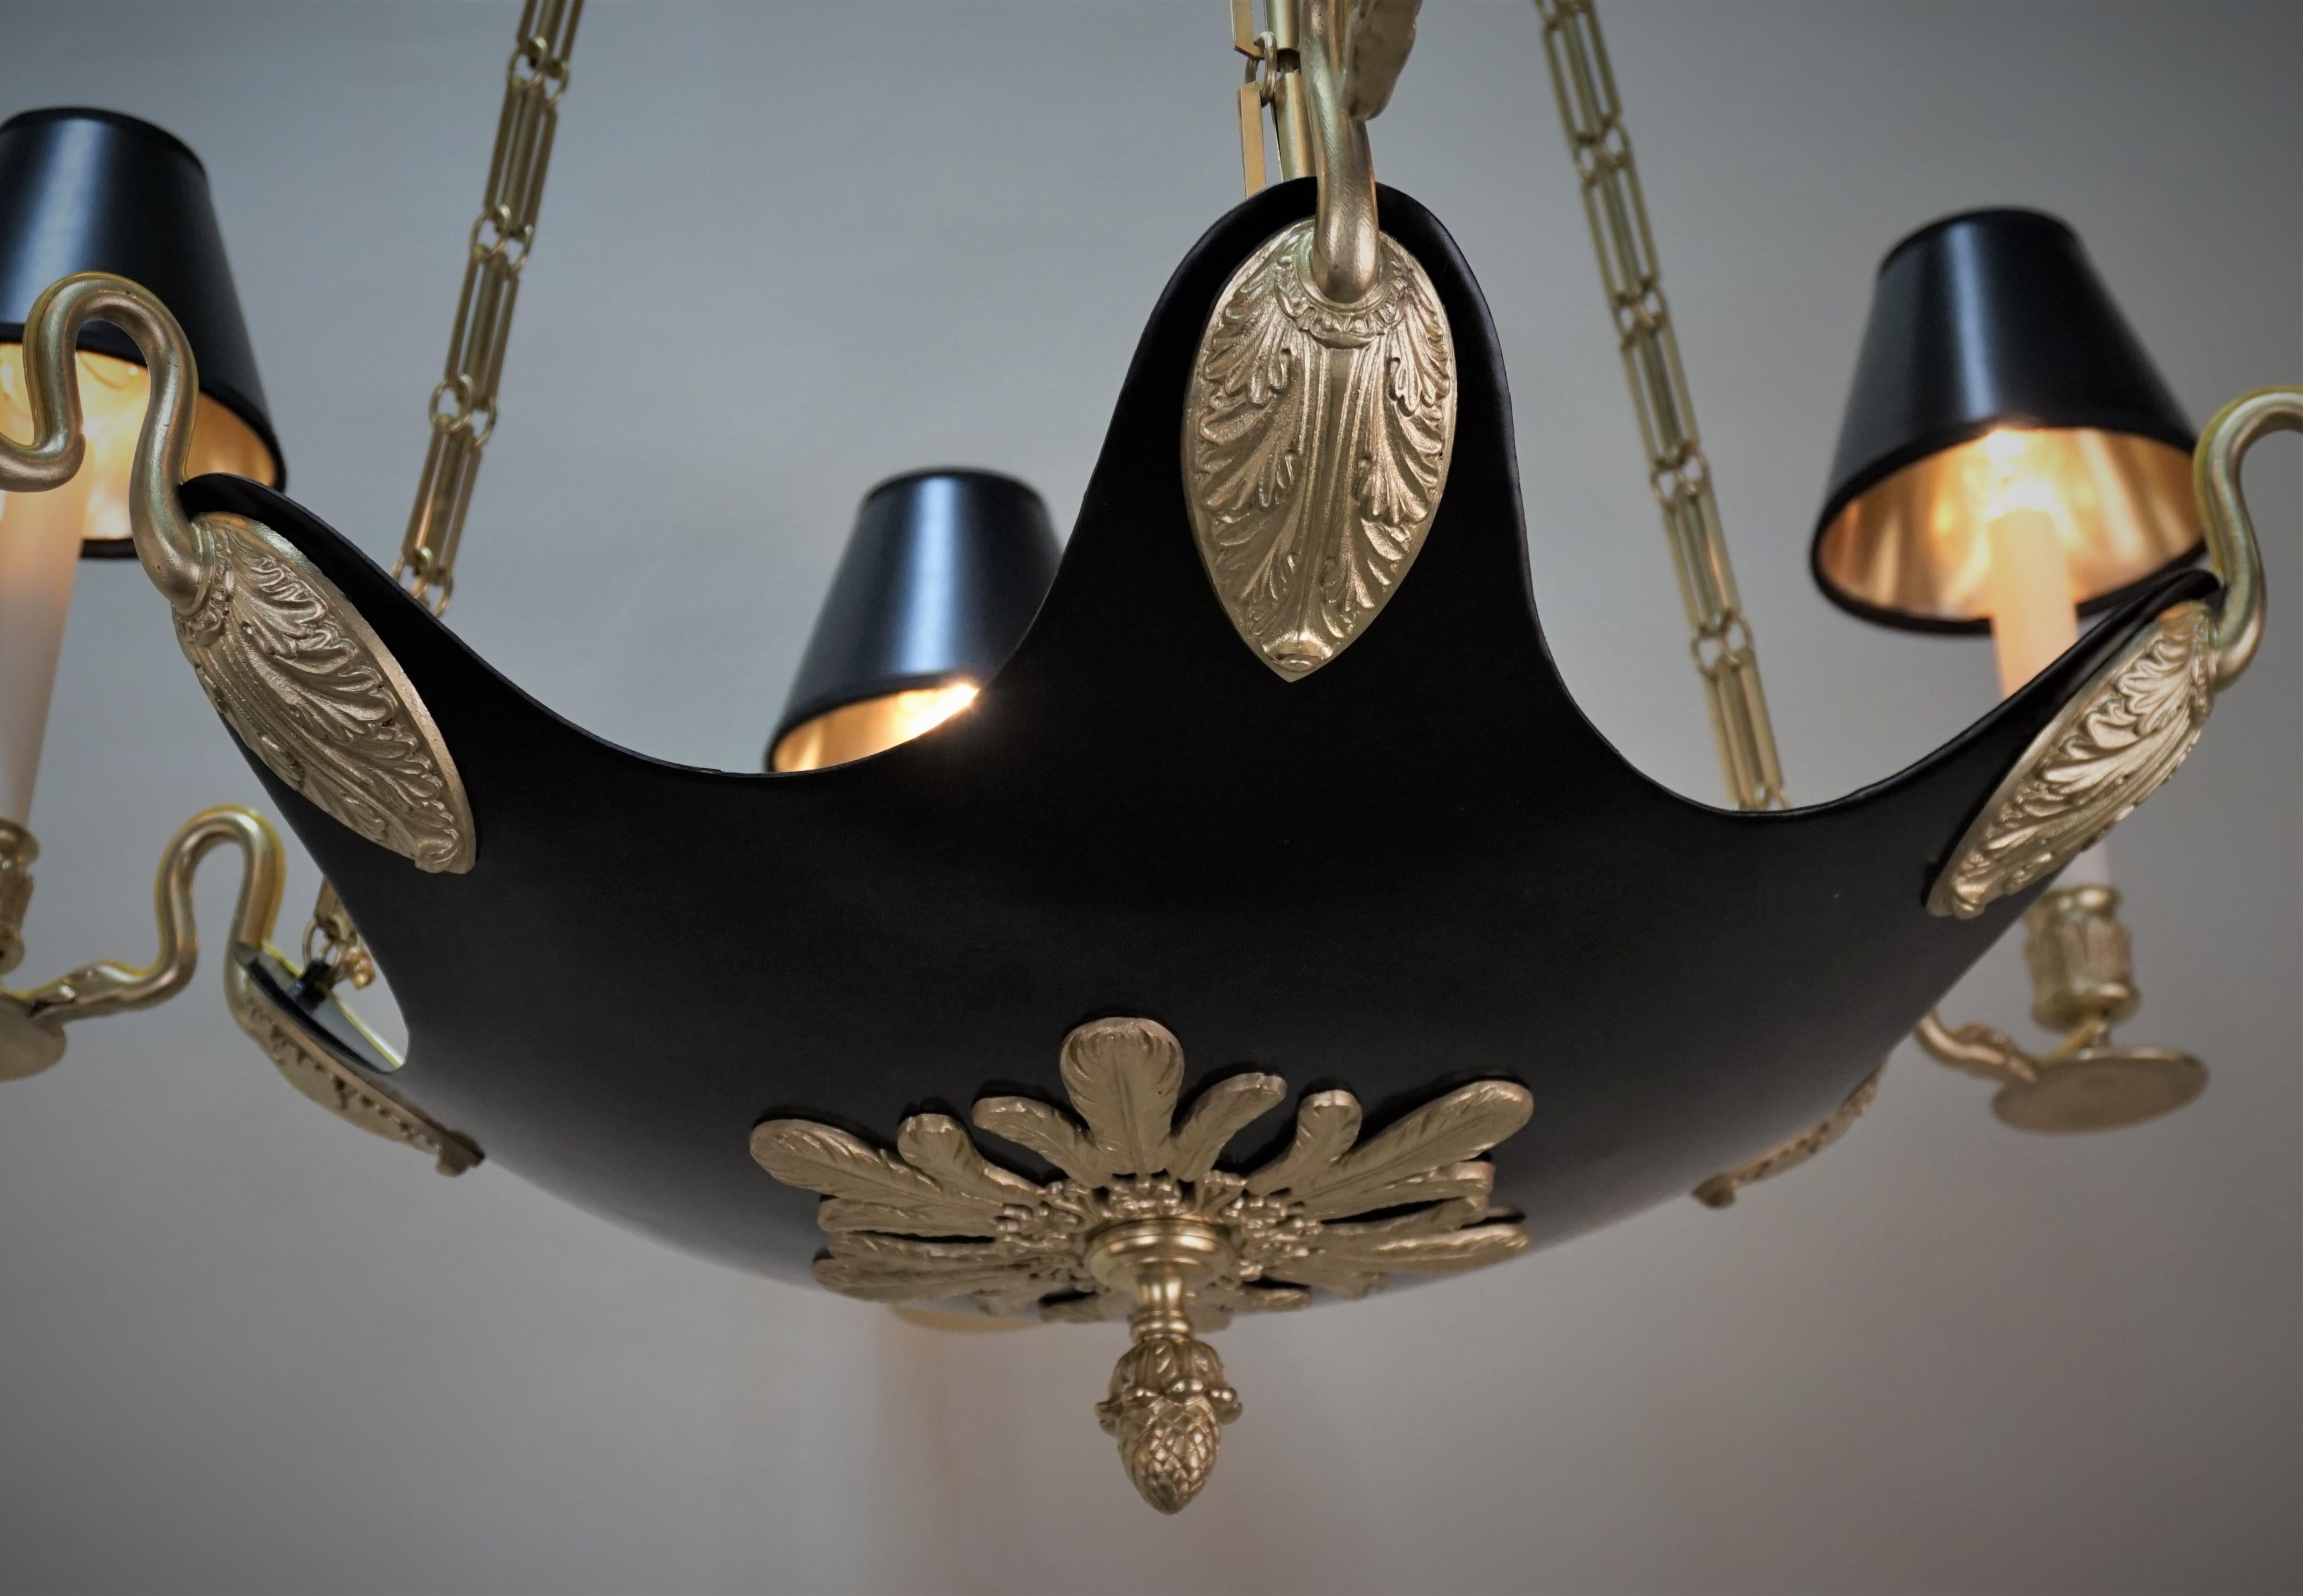 Six light swan arm, bronze and black lacquer on bronze empire style chandelier.